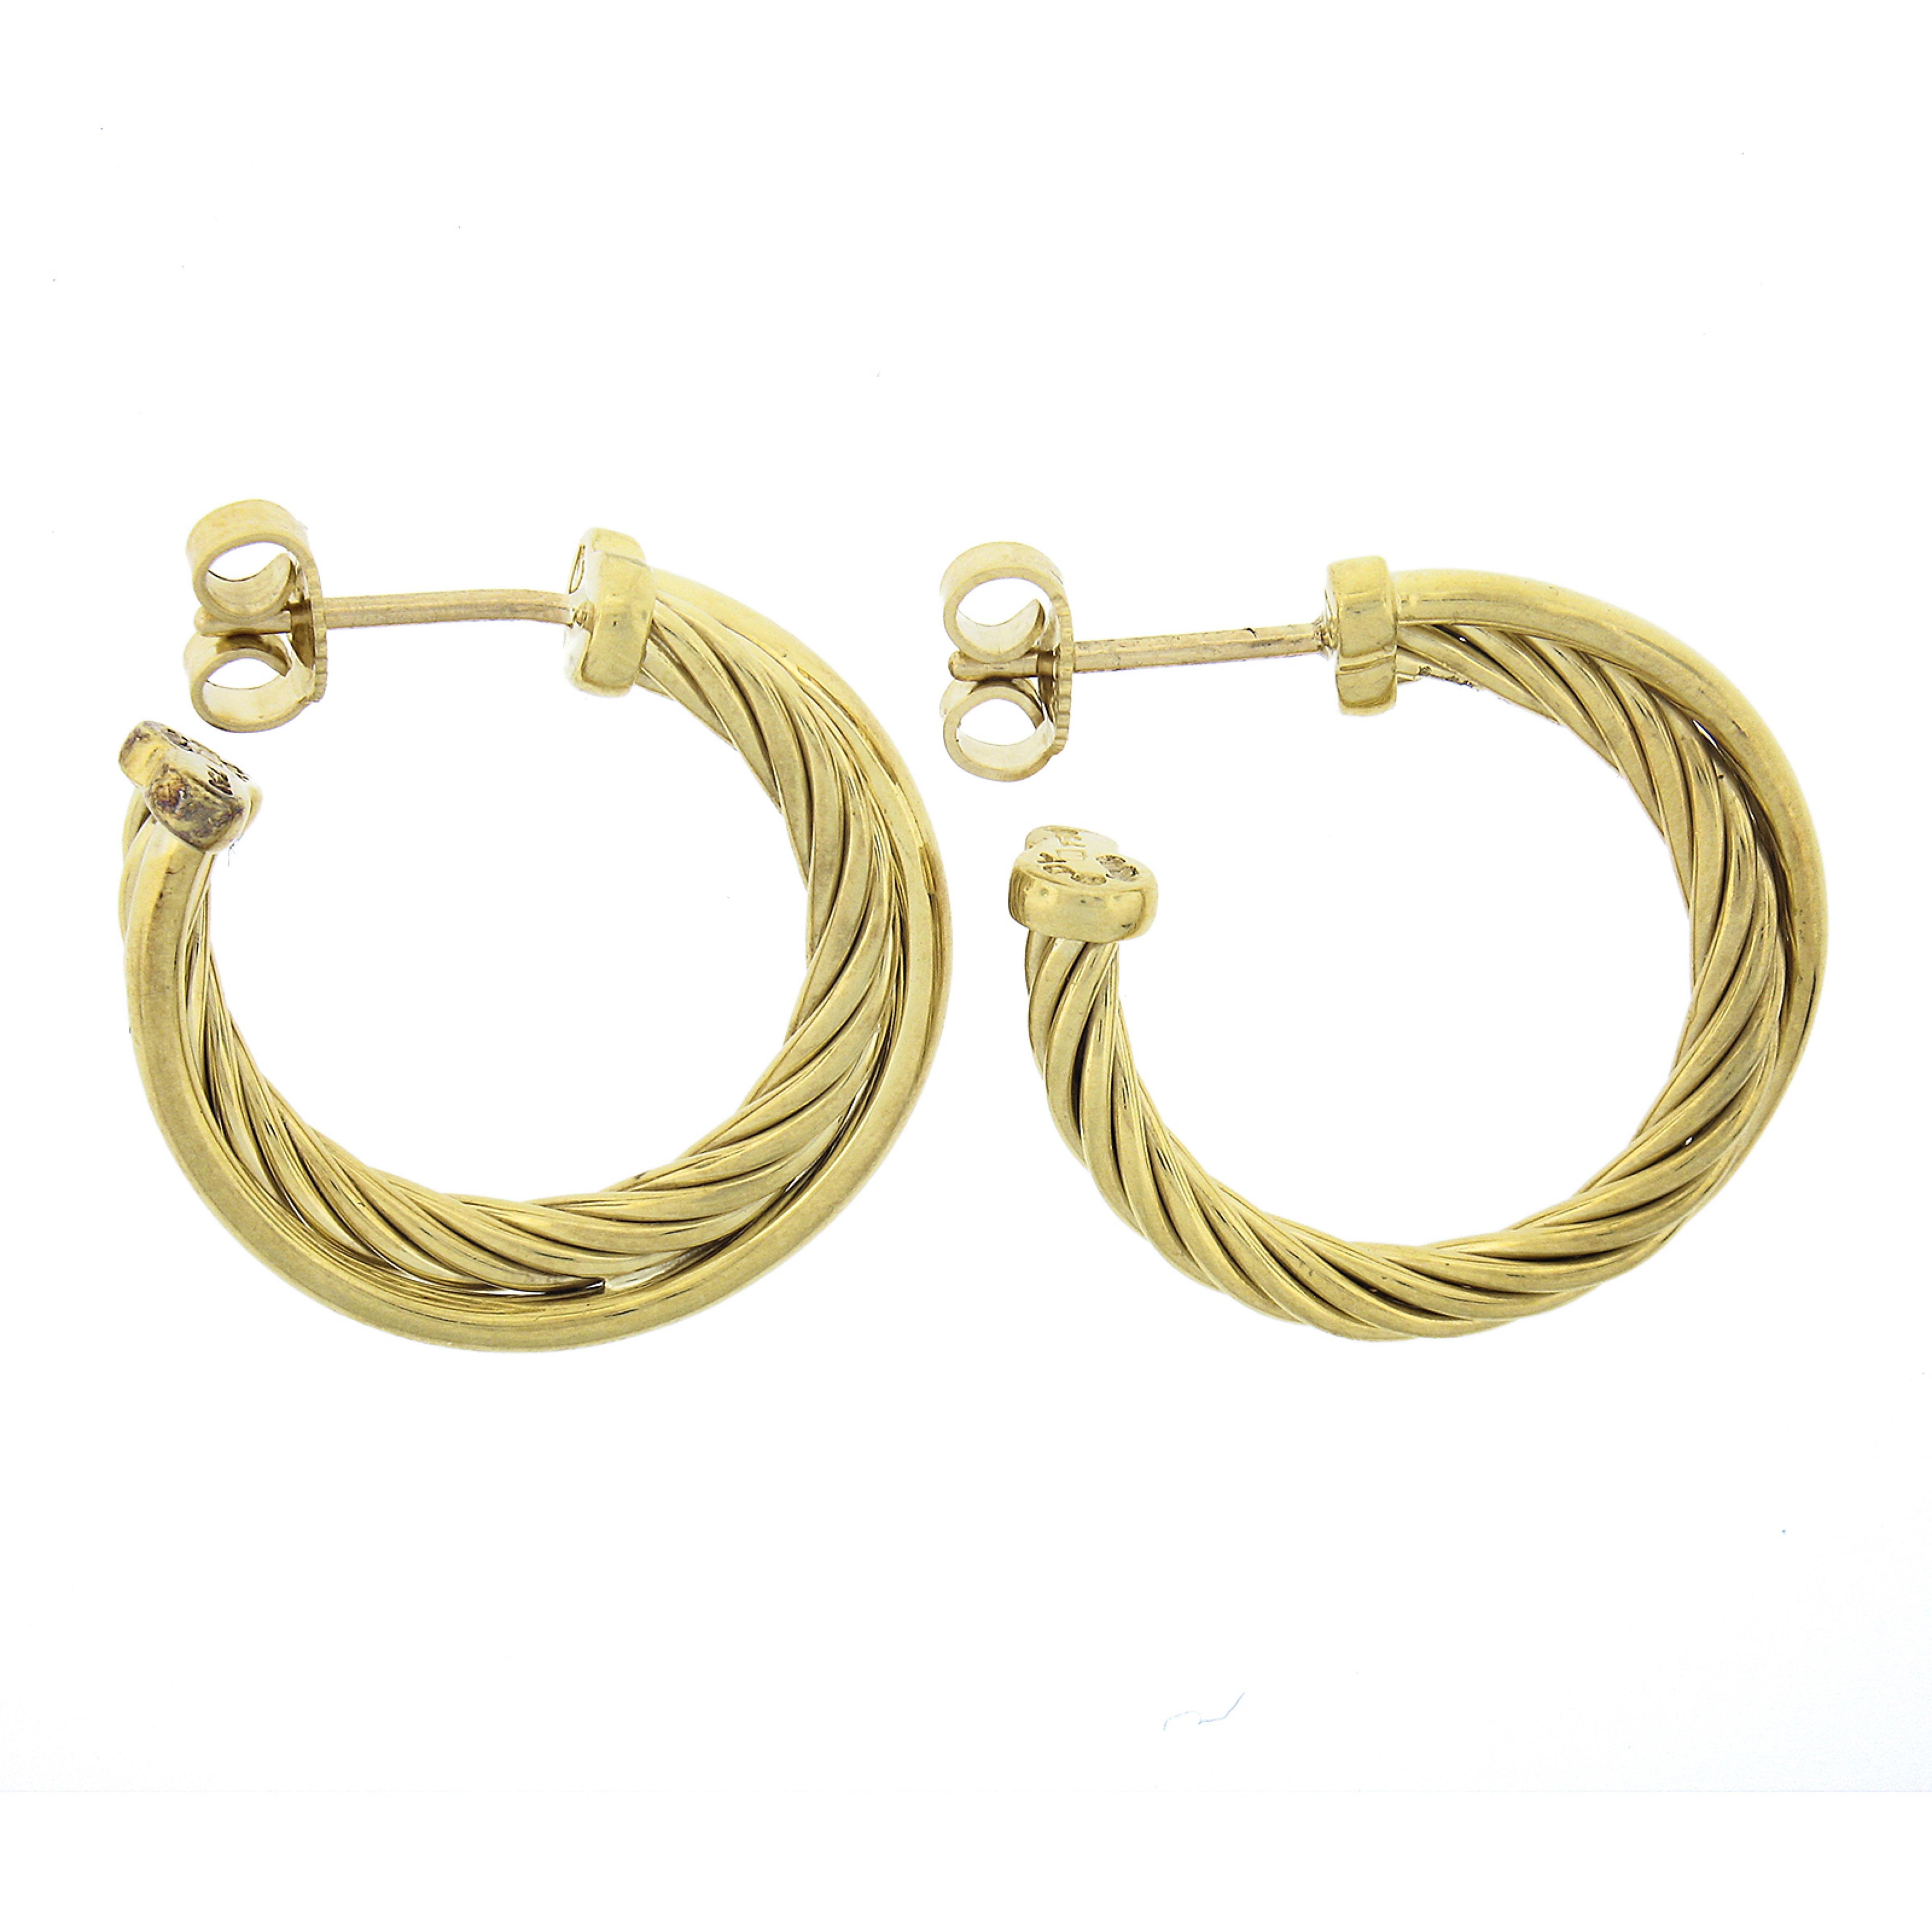 David Yurman 18k Yellow Gold Cable & Polished Tubes Round Hoop Earrings In Excellent Condition For Sale In Montclair, NJ